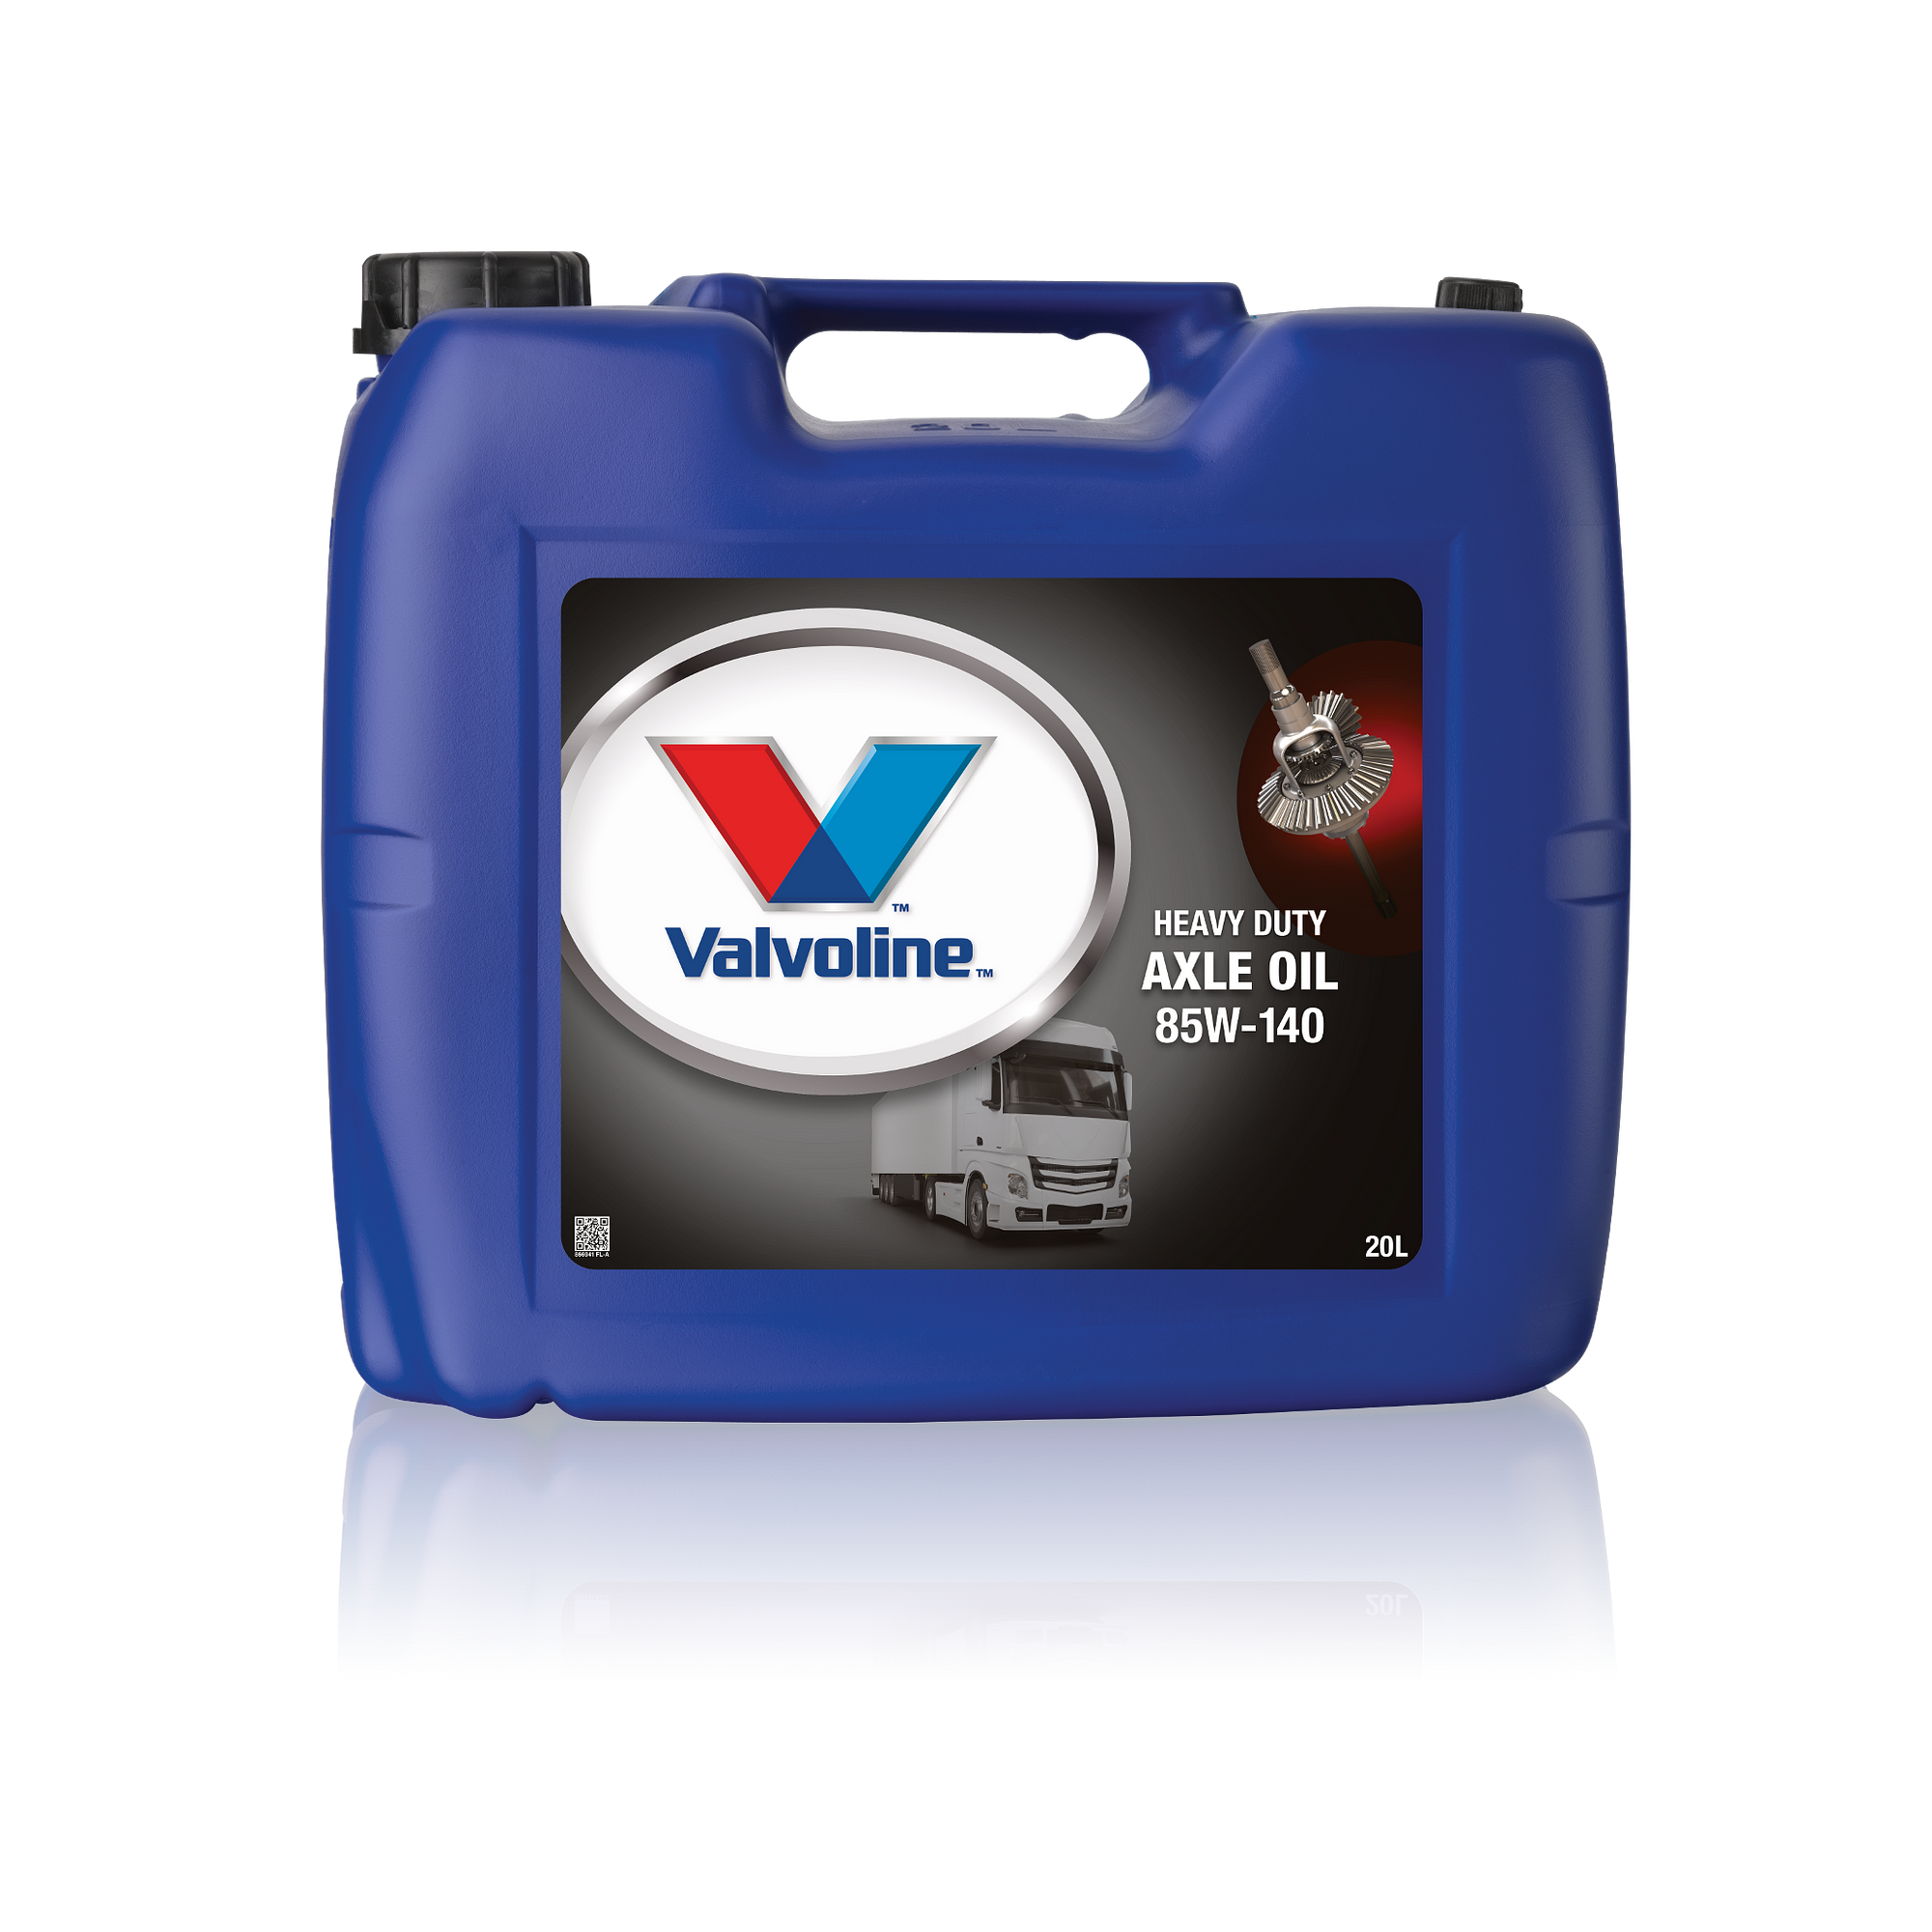 Atf pro. Моторное масло Valvoline Premium Blue 7800 sa. Valvoline TDL 75w-80. Valvoline Premium Blue 7800 15w-40. Valvoline TDL 75w-90.